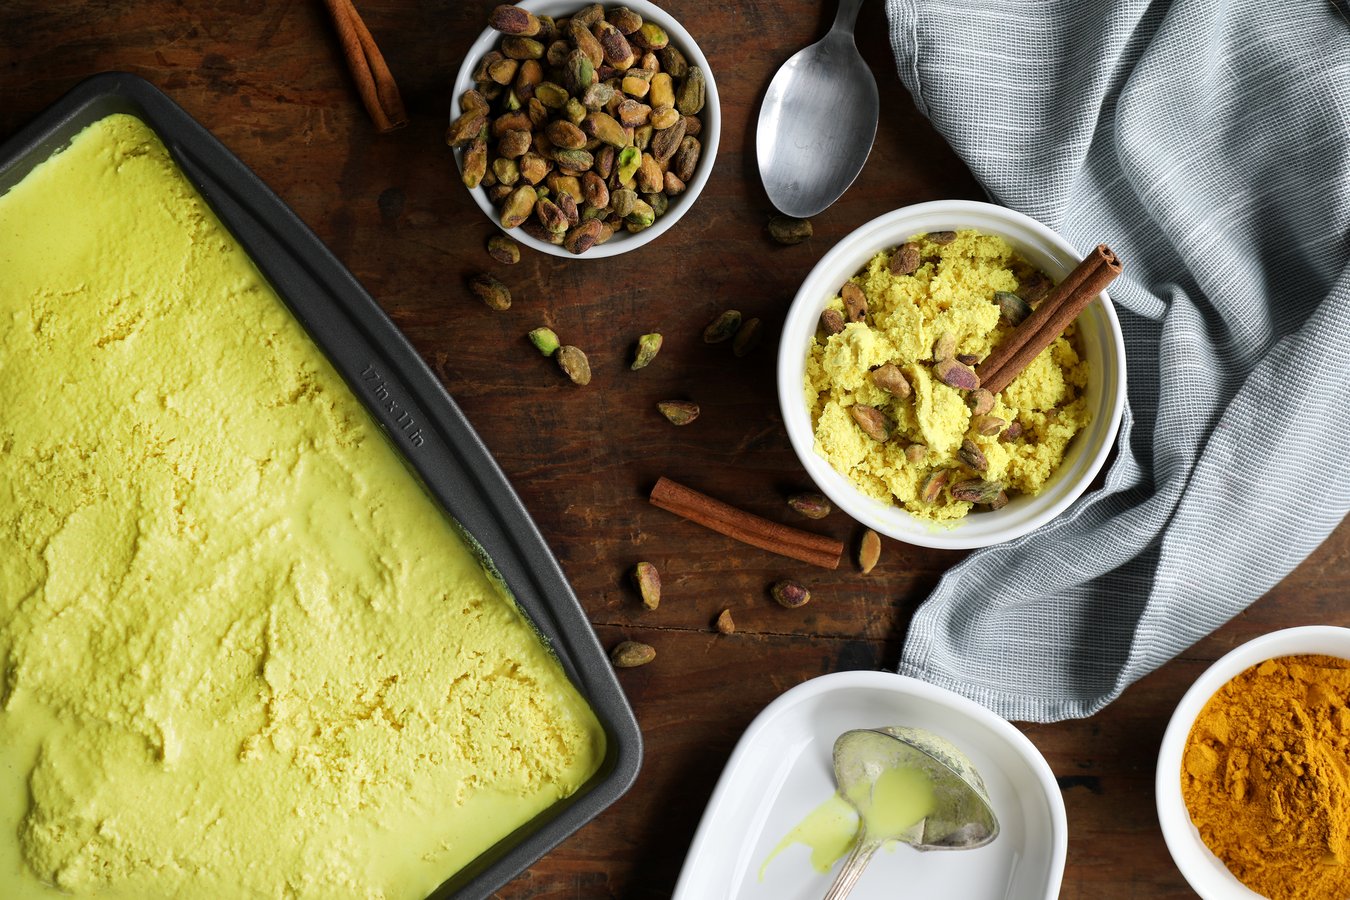 Ingredients to make vegan golden milk ice cream, including golden milk turmeric powder, cinnamon sticks, pistachios with a pan of finished ice cream and a scoop.